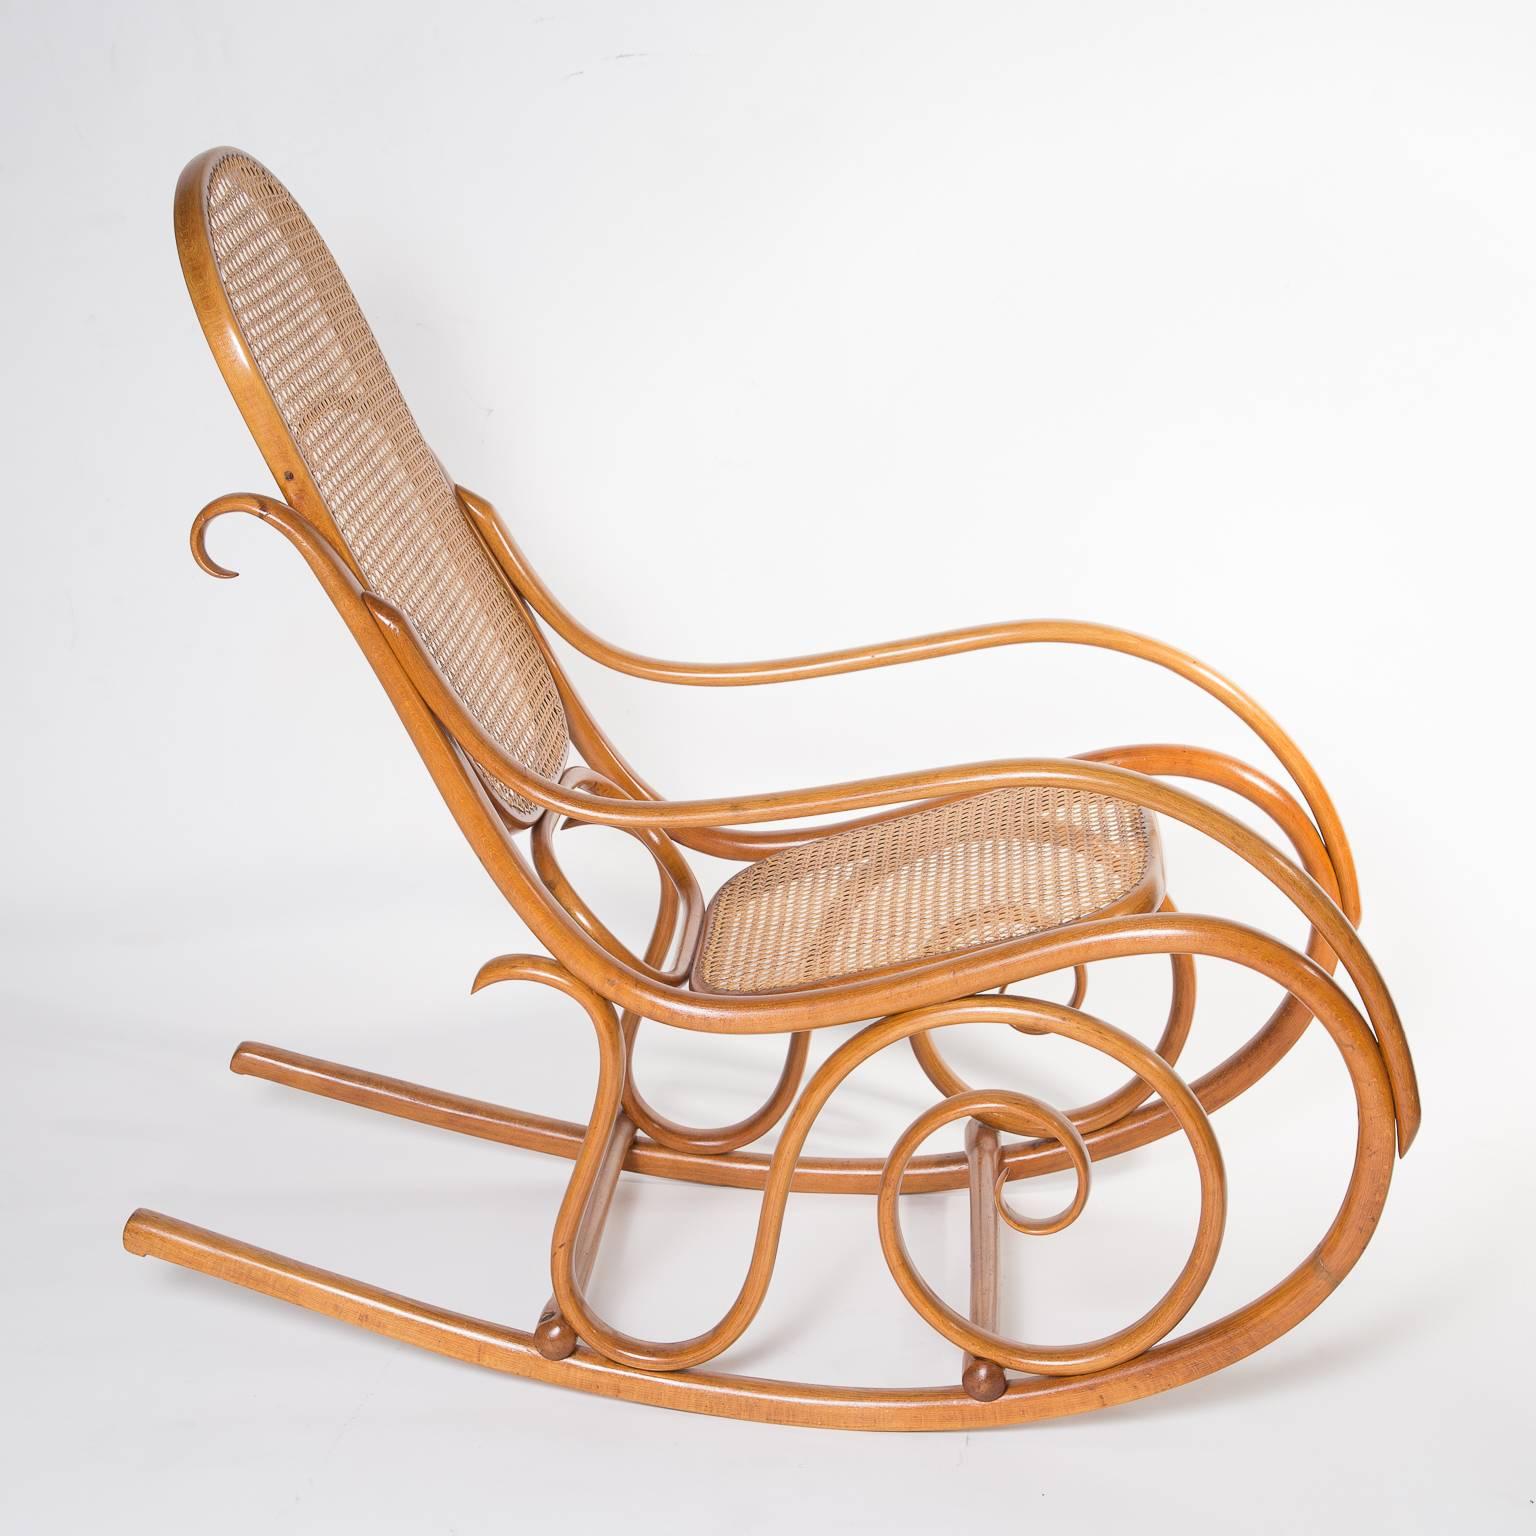 Staind beech bentwood rocking chair newly refurbished. 
very nice condition,
refurbished by a Thonet restoration expert, Harald Saettler.

Part of a Thonet family member private collection.